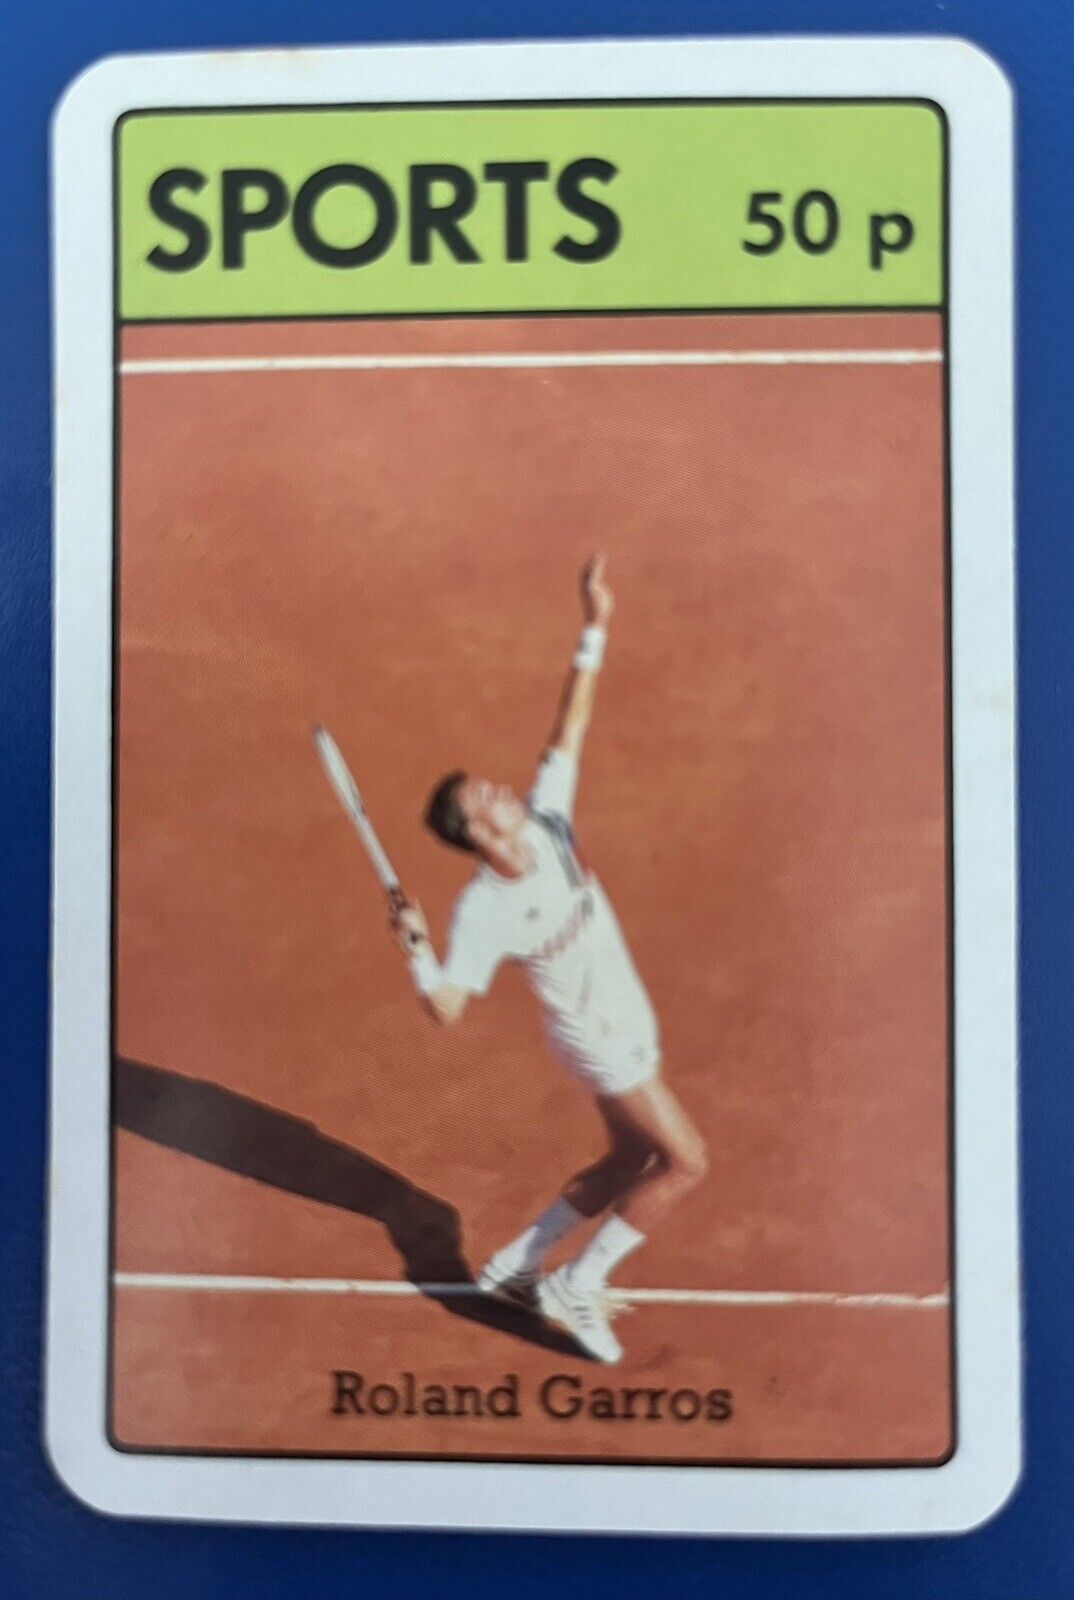 TENNIS STAR IVAN LENDL VERY RARE ROOKIE CARD FRENCH EDITION 1986